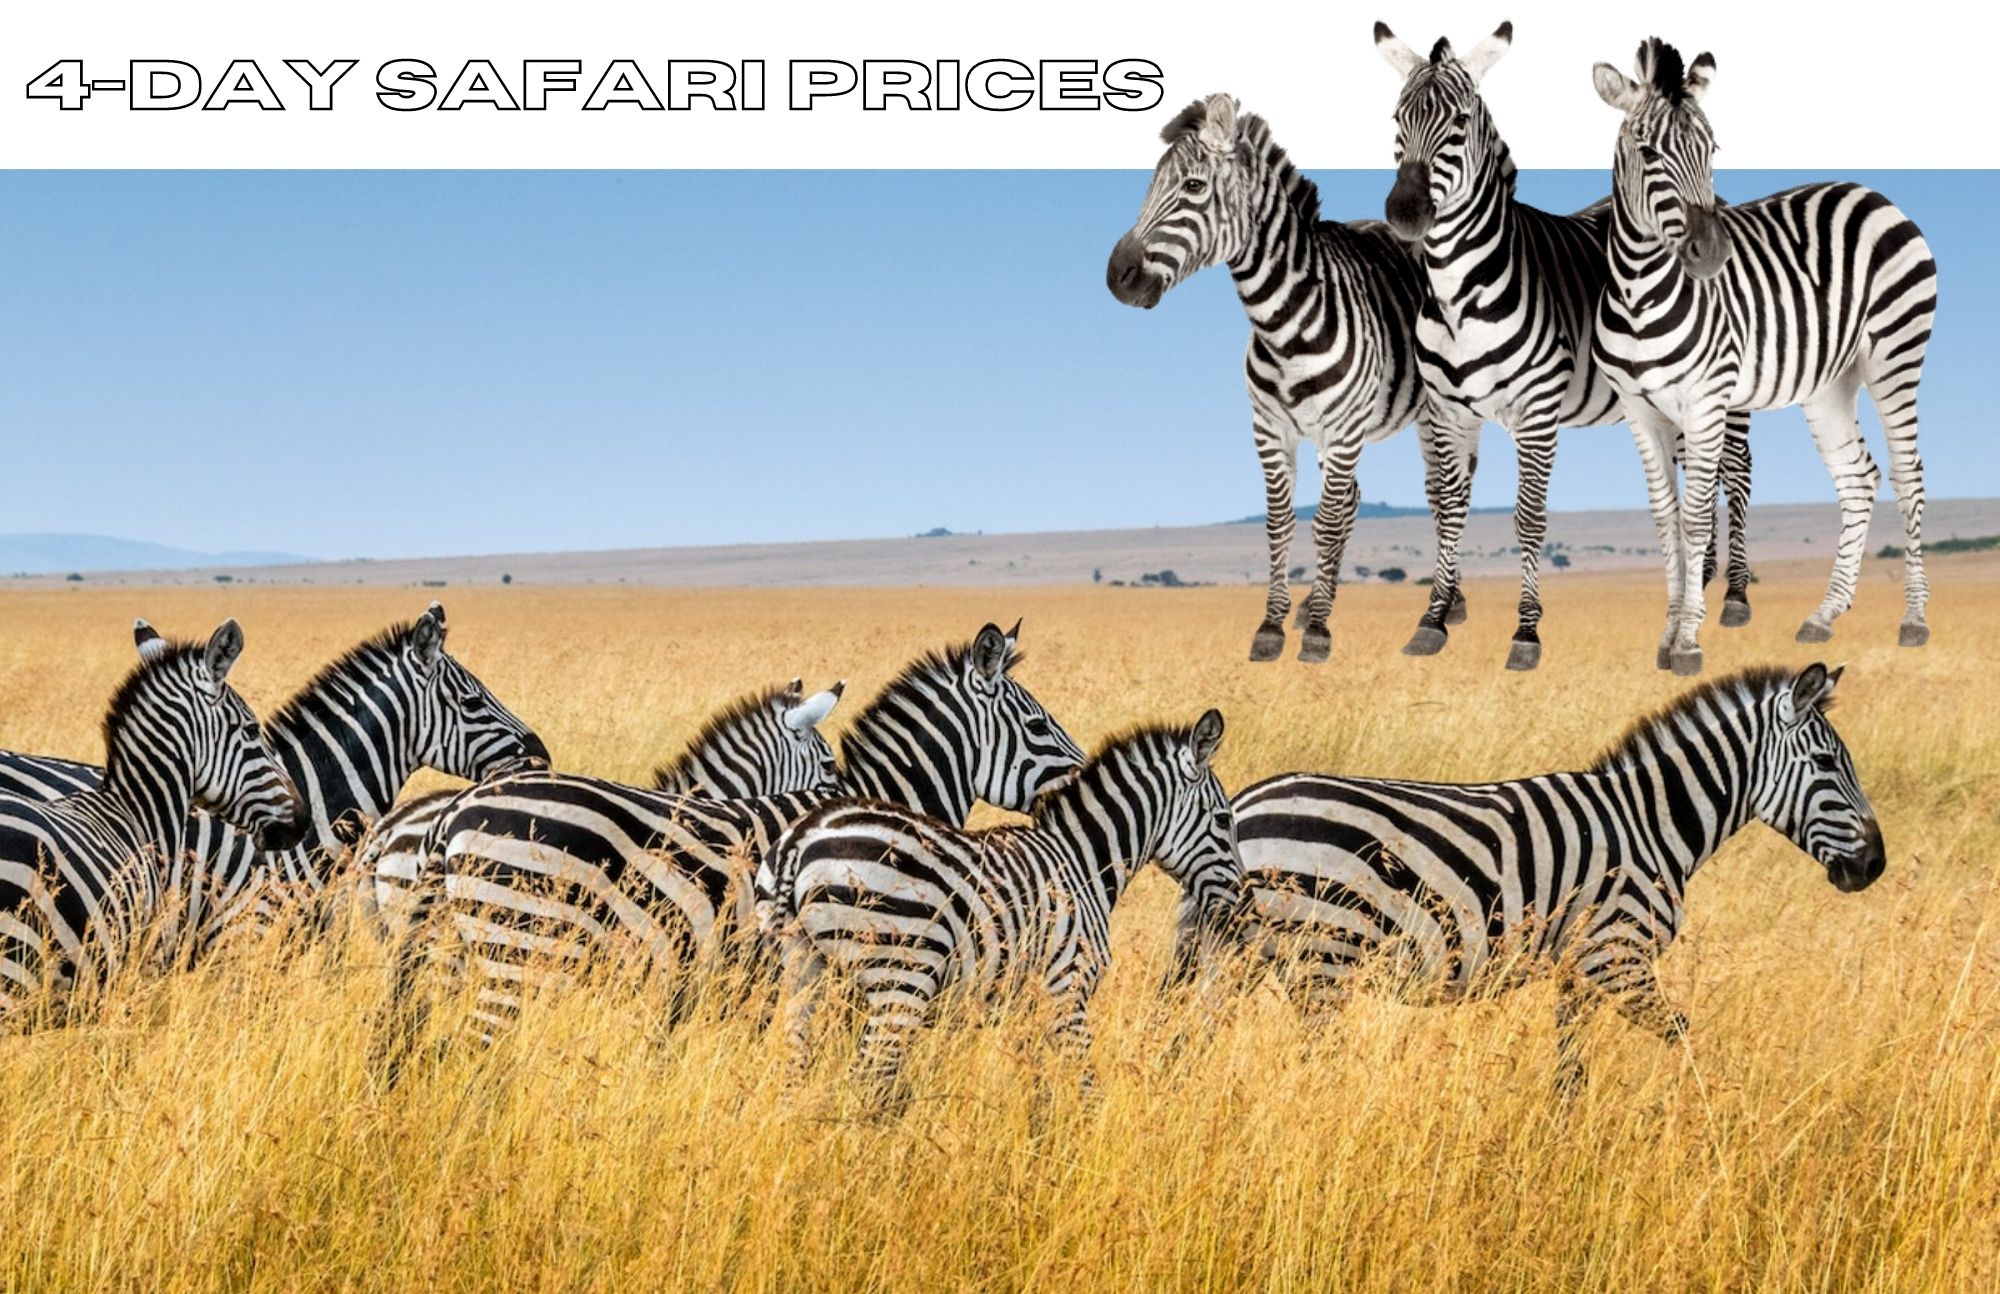 4-Day Safari Prices And Options That Are Available